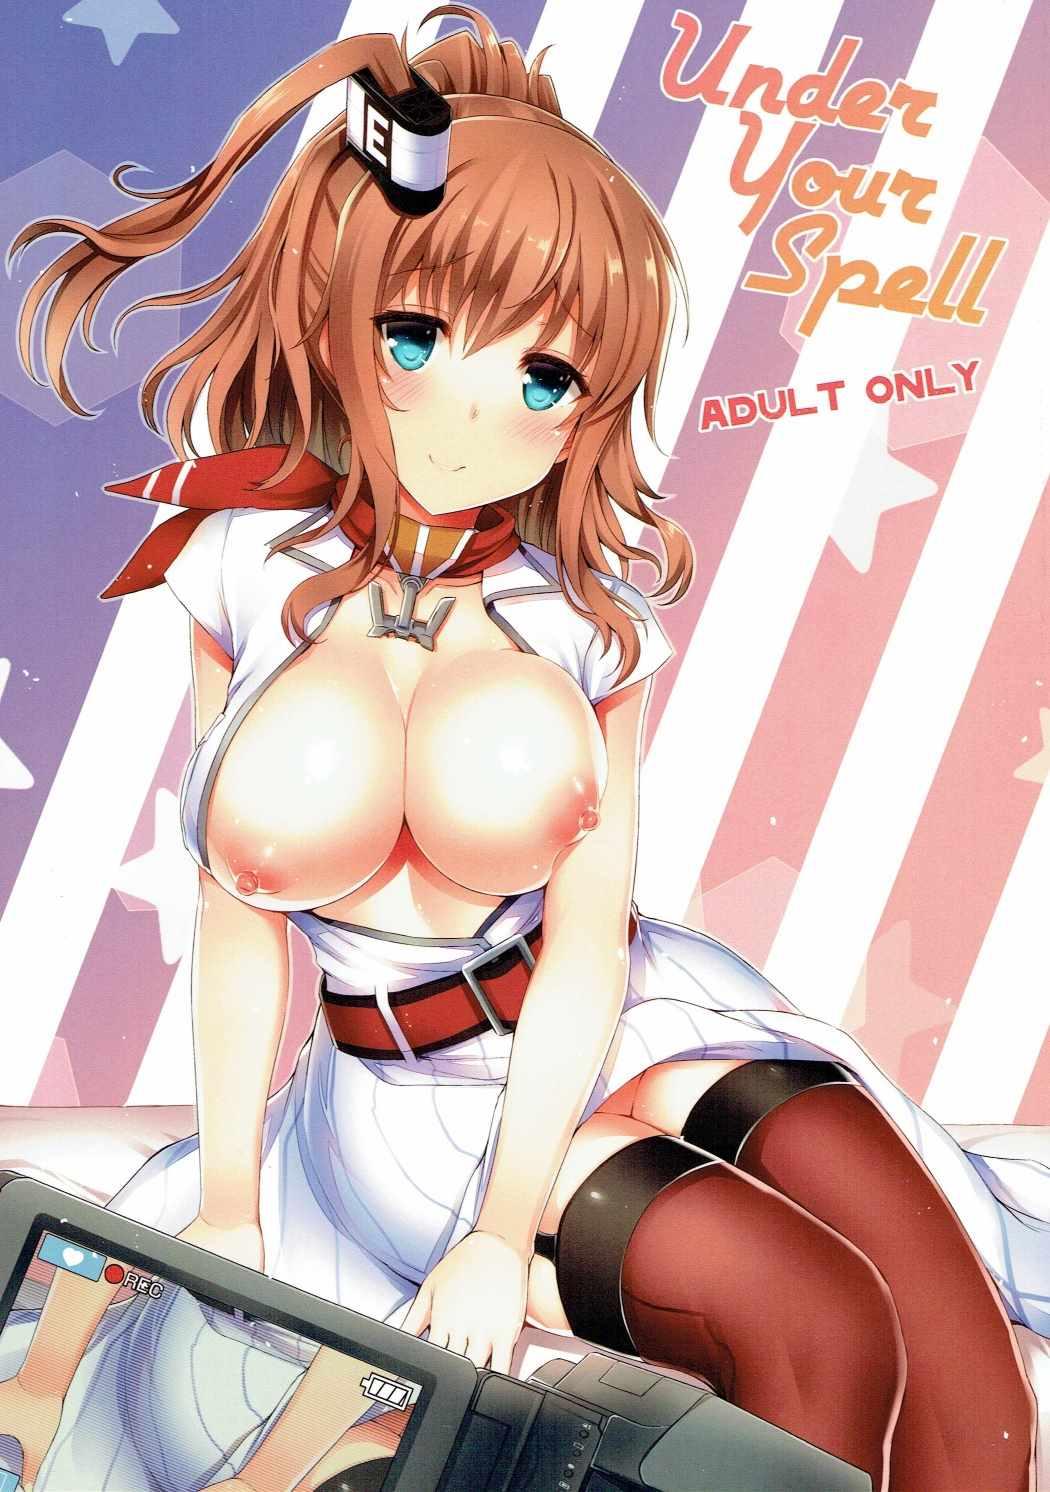 Hermana UNDER YOUR SPELL - Kantai collection Semen - Picture 1